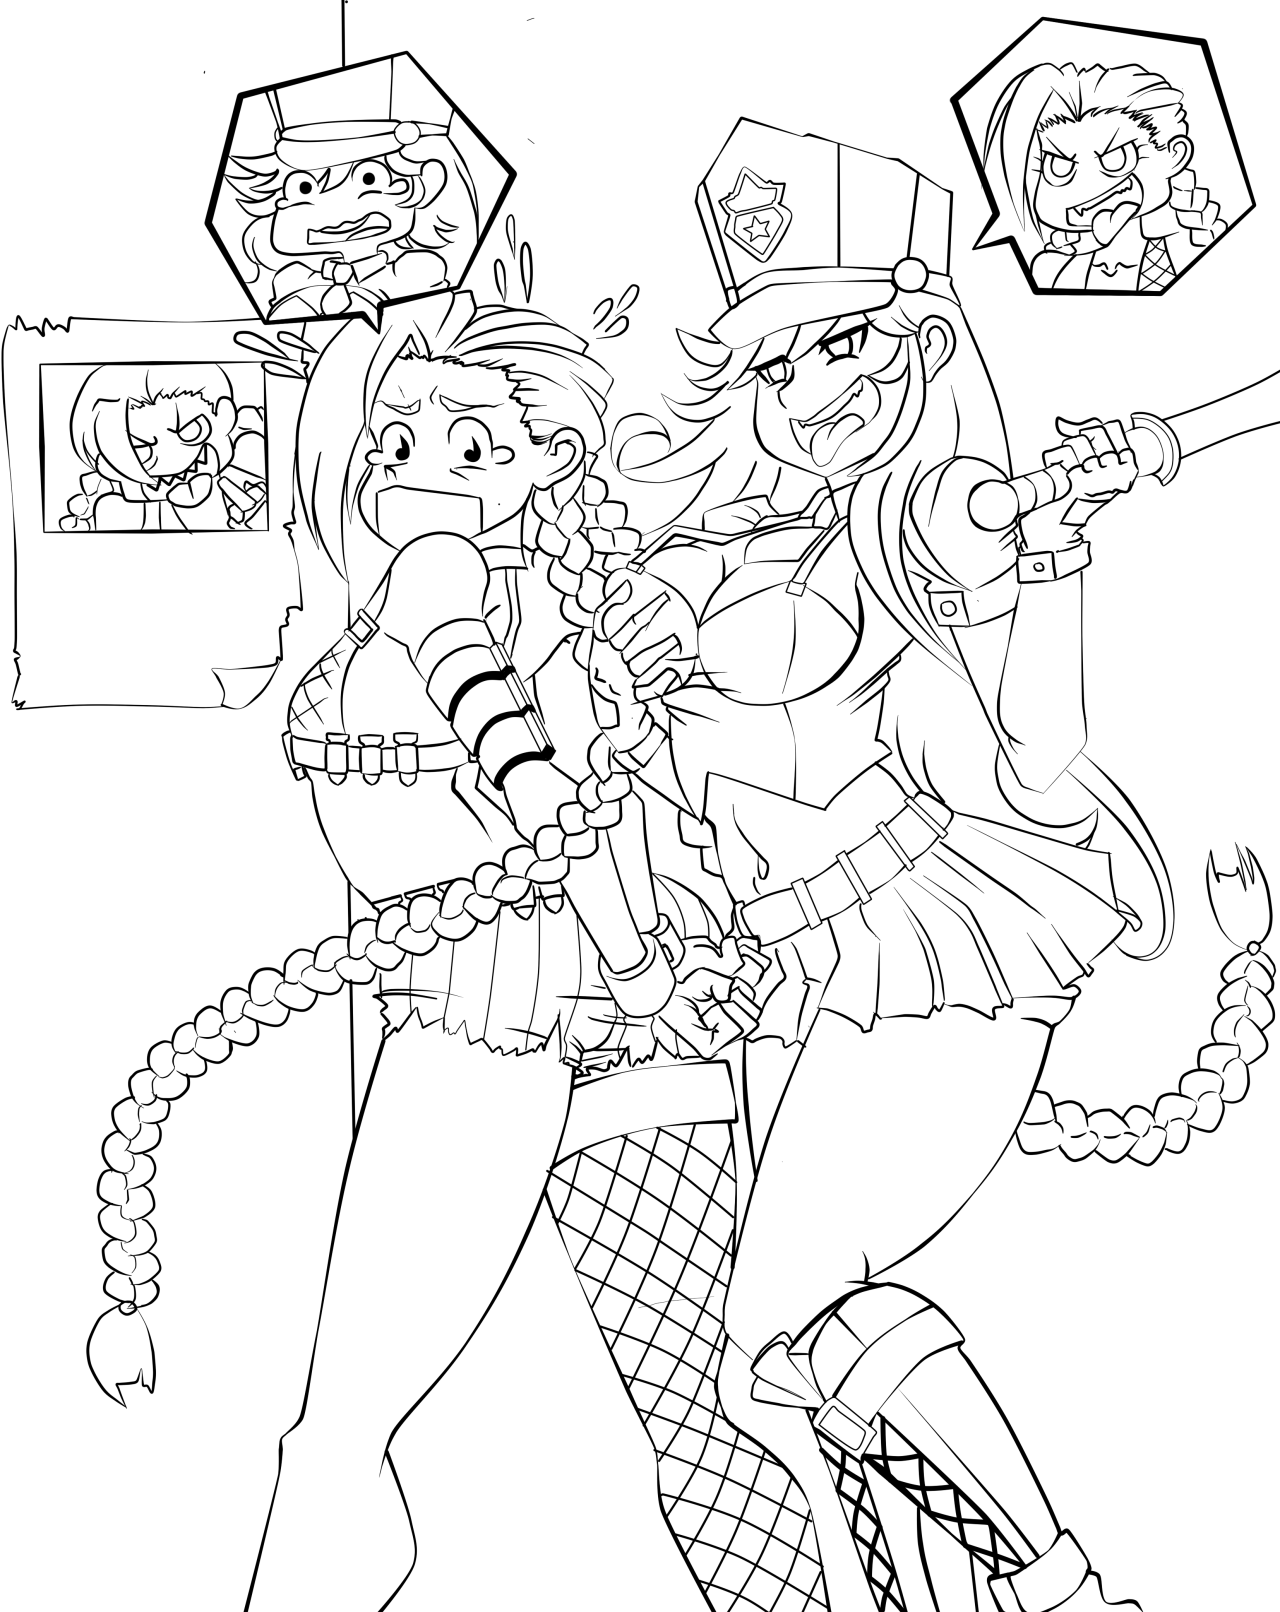 can&rsquo;t wait to color them. jinx and caitlyn body swap, lineart. just had